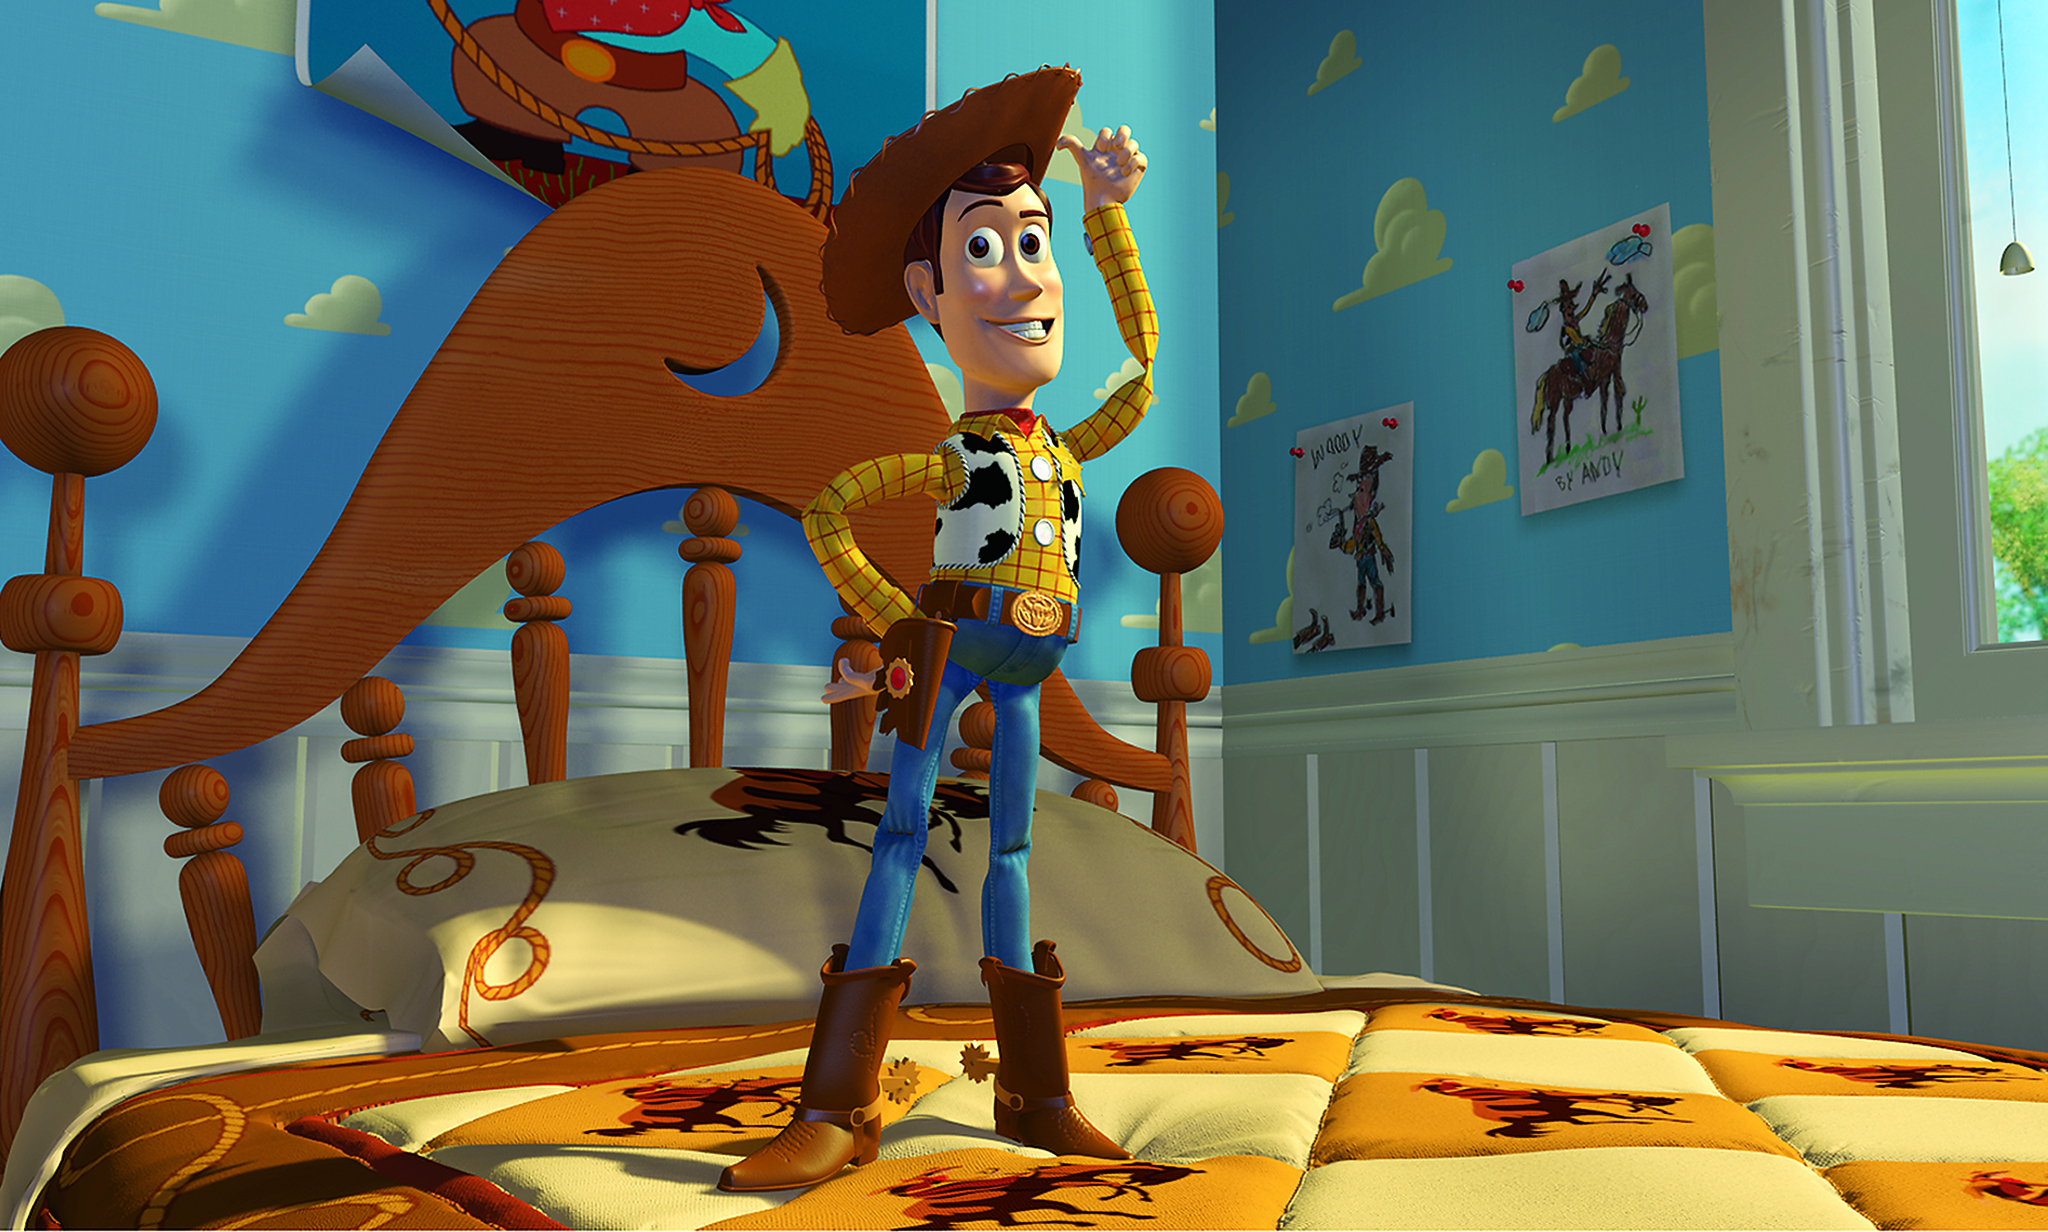 Toy Story Full Movie Hindi Dubbed Download